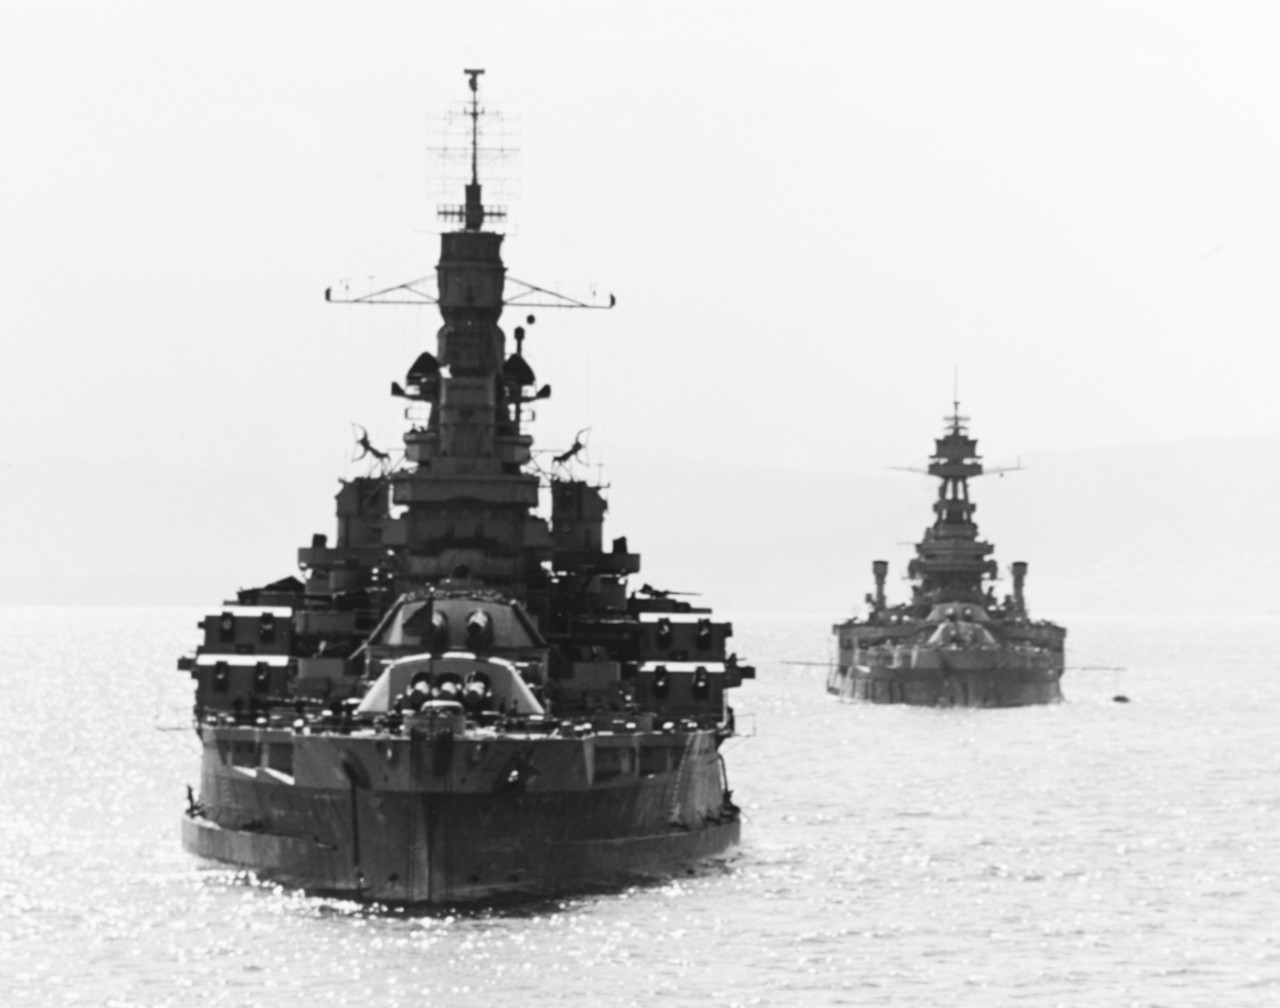 80-G-367897:  USS Nevada (BB-36), and USS Texas (BB-35) – right, May 1944.  In Belfast Lough, Northern Ireland, 14 May 1944.  USS Texas (BB-35) is at right.  Photographed from USS Quincy (CA-71). Official U.S. Navy Photograph, now in the collections of the National Archives  